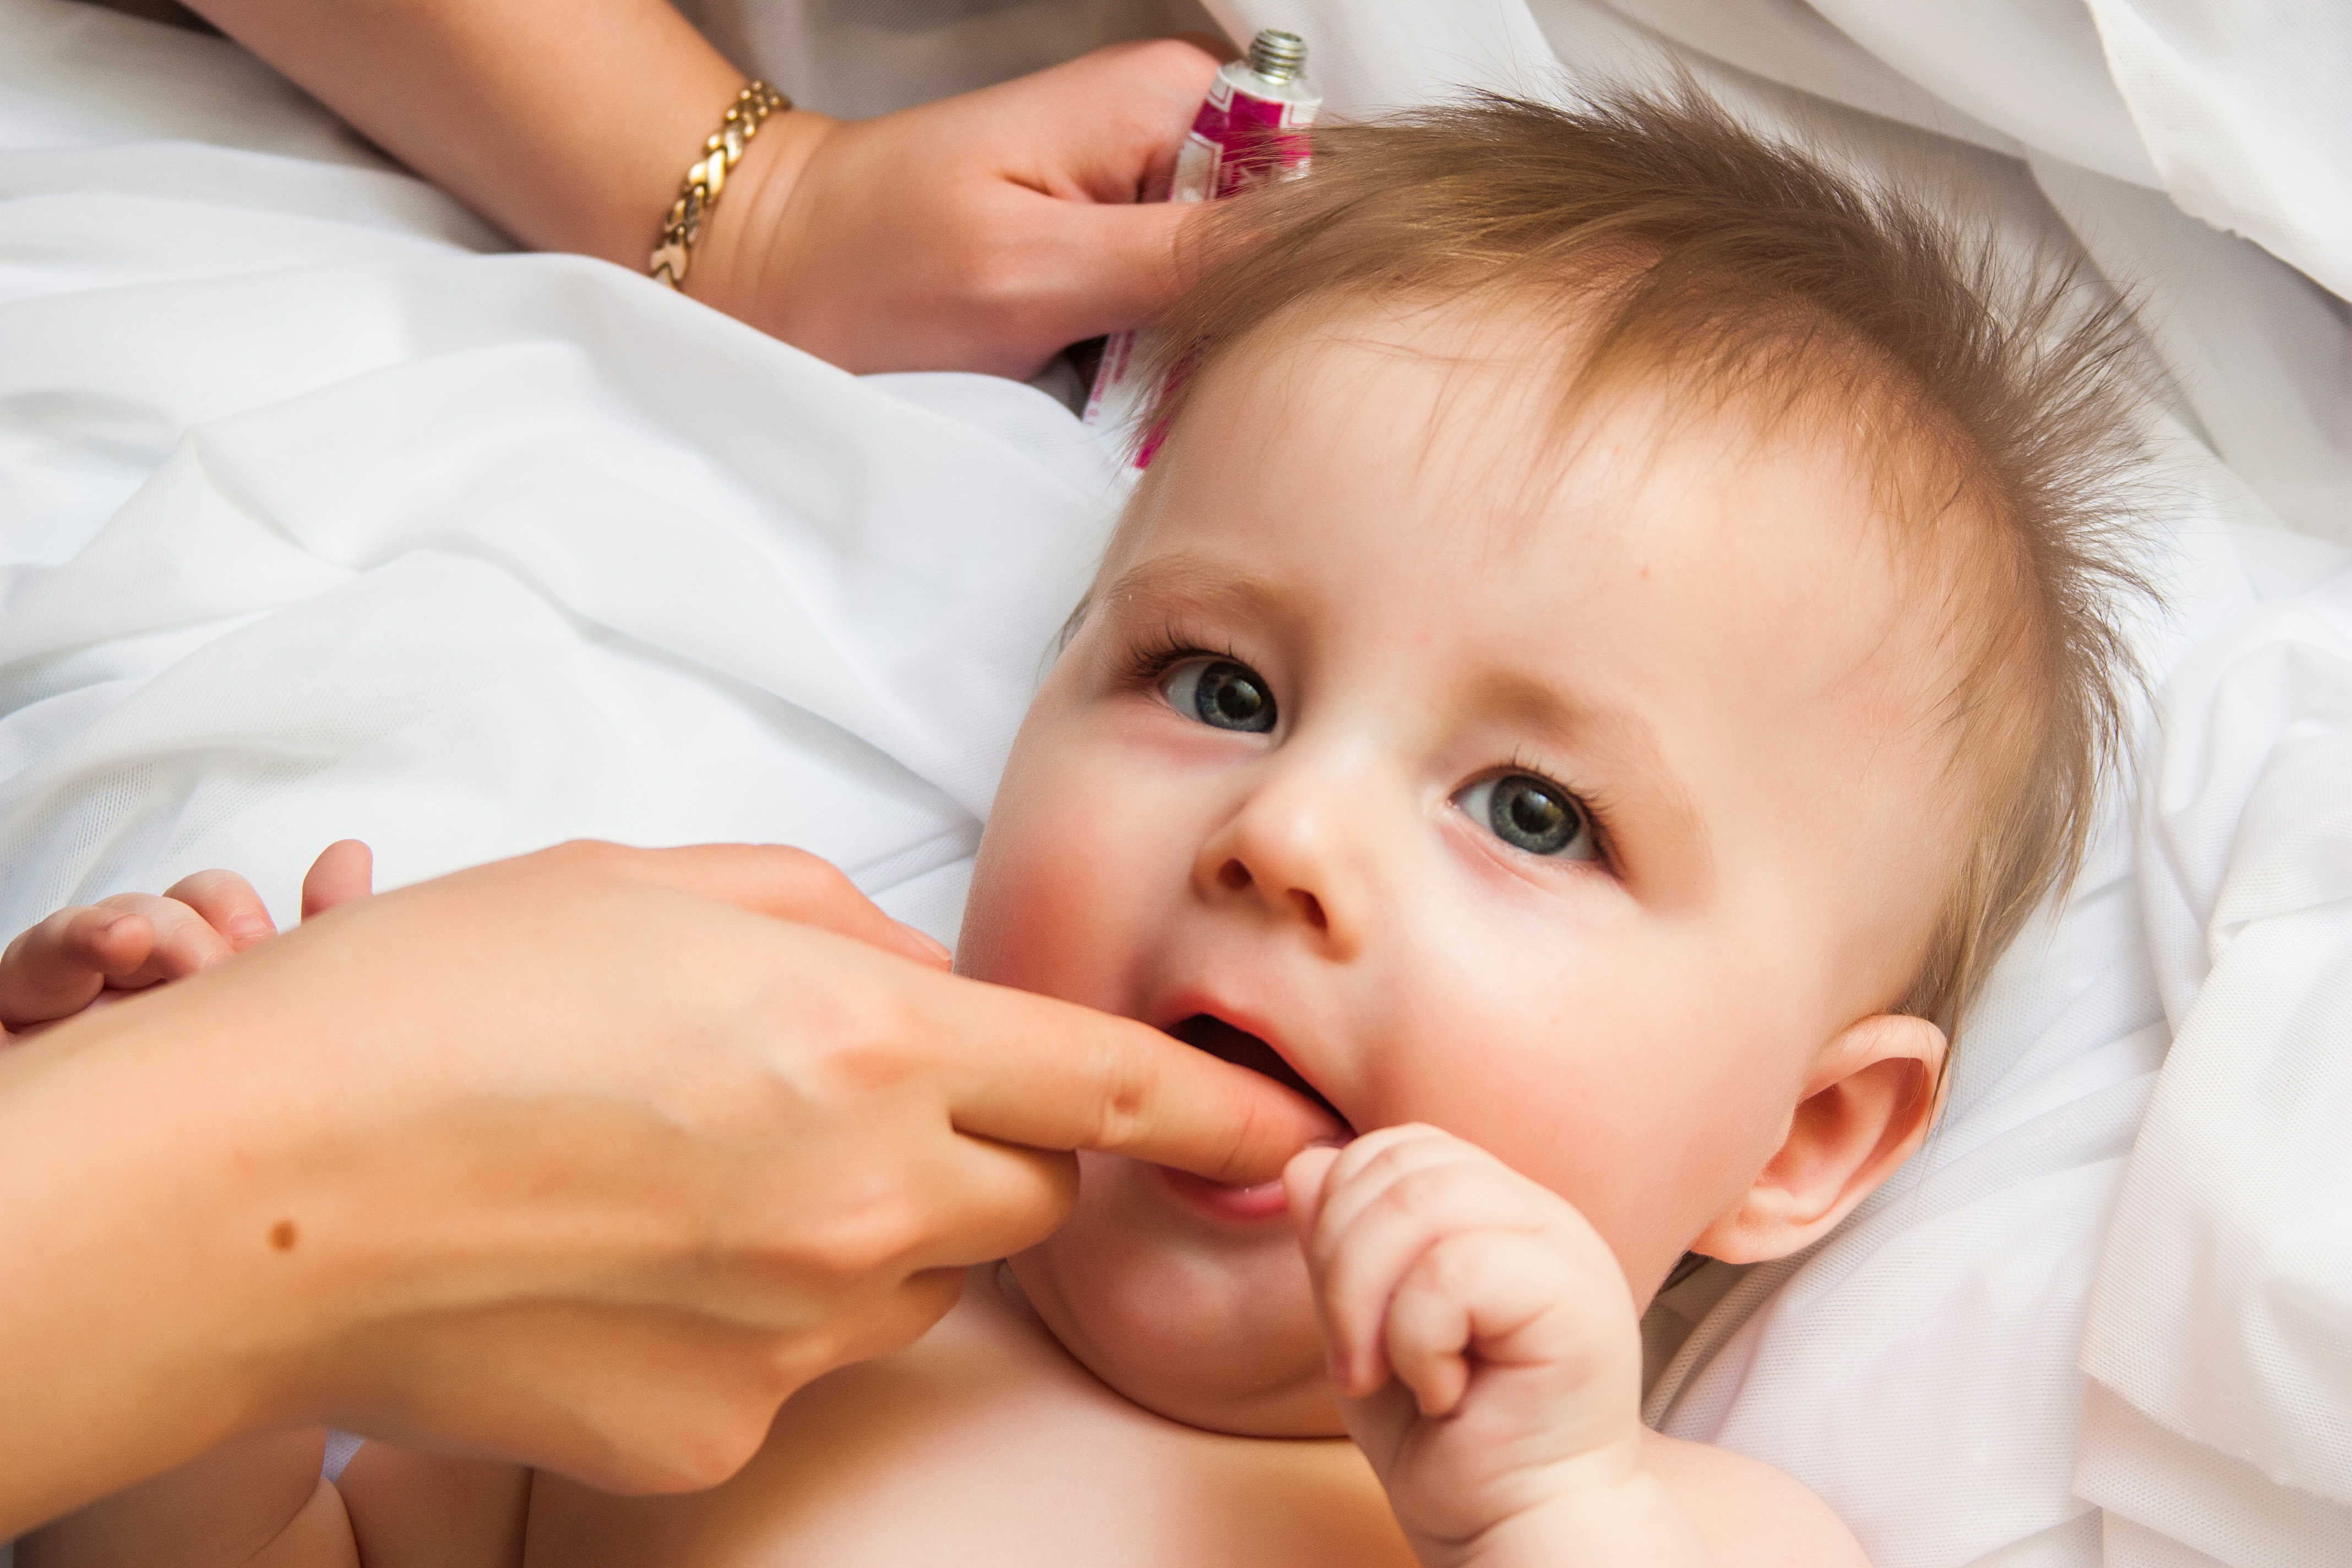 Tips for parents for teething babies #1